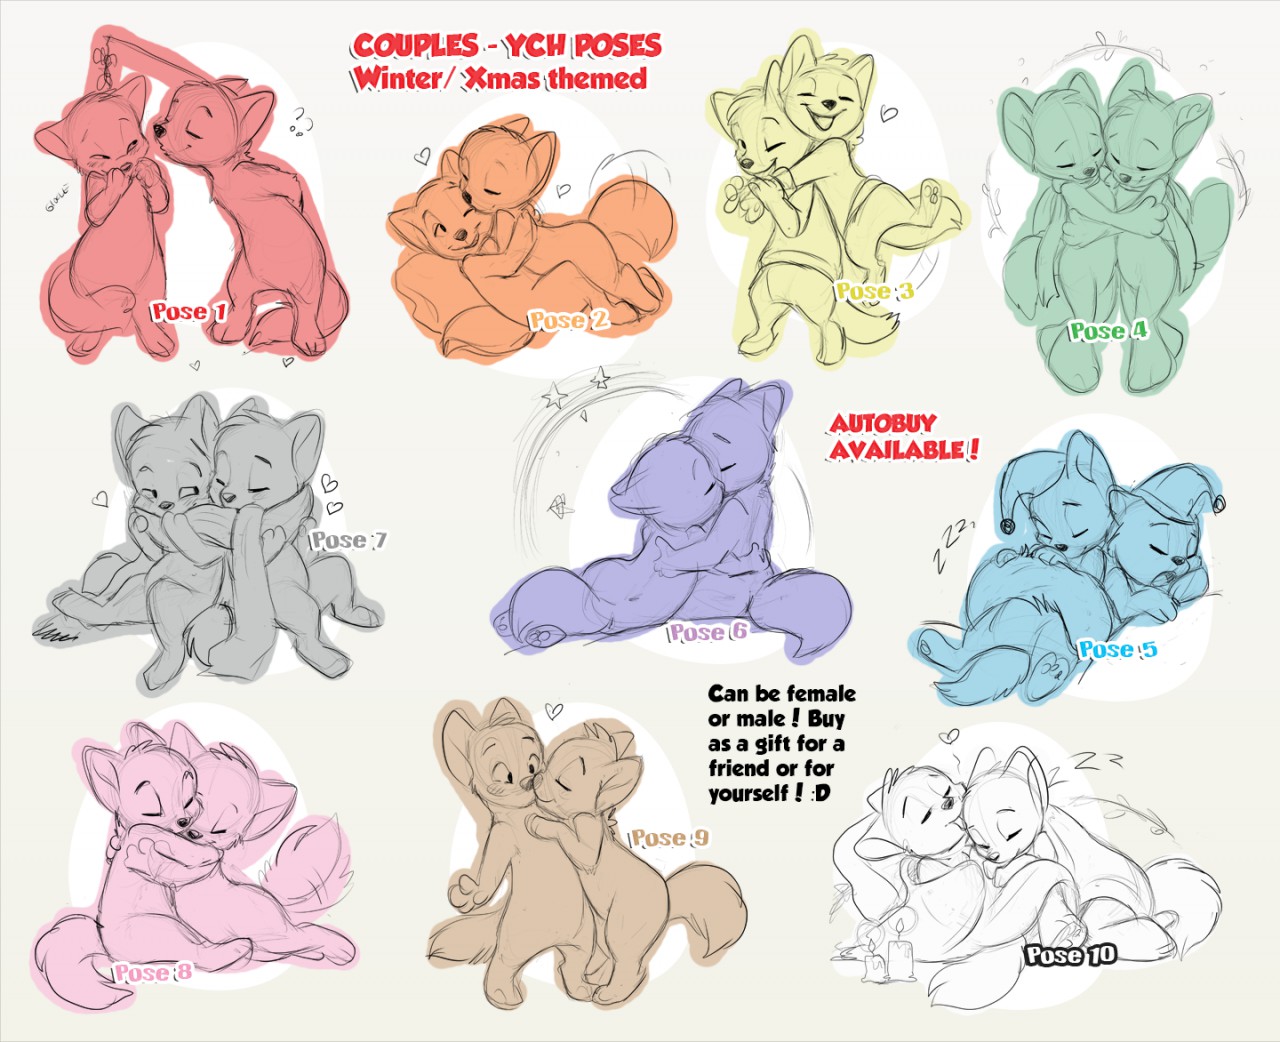 Kemono Style COUPLES YCH Poses - Auction. 